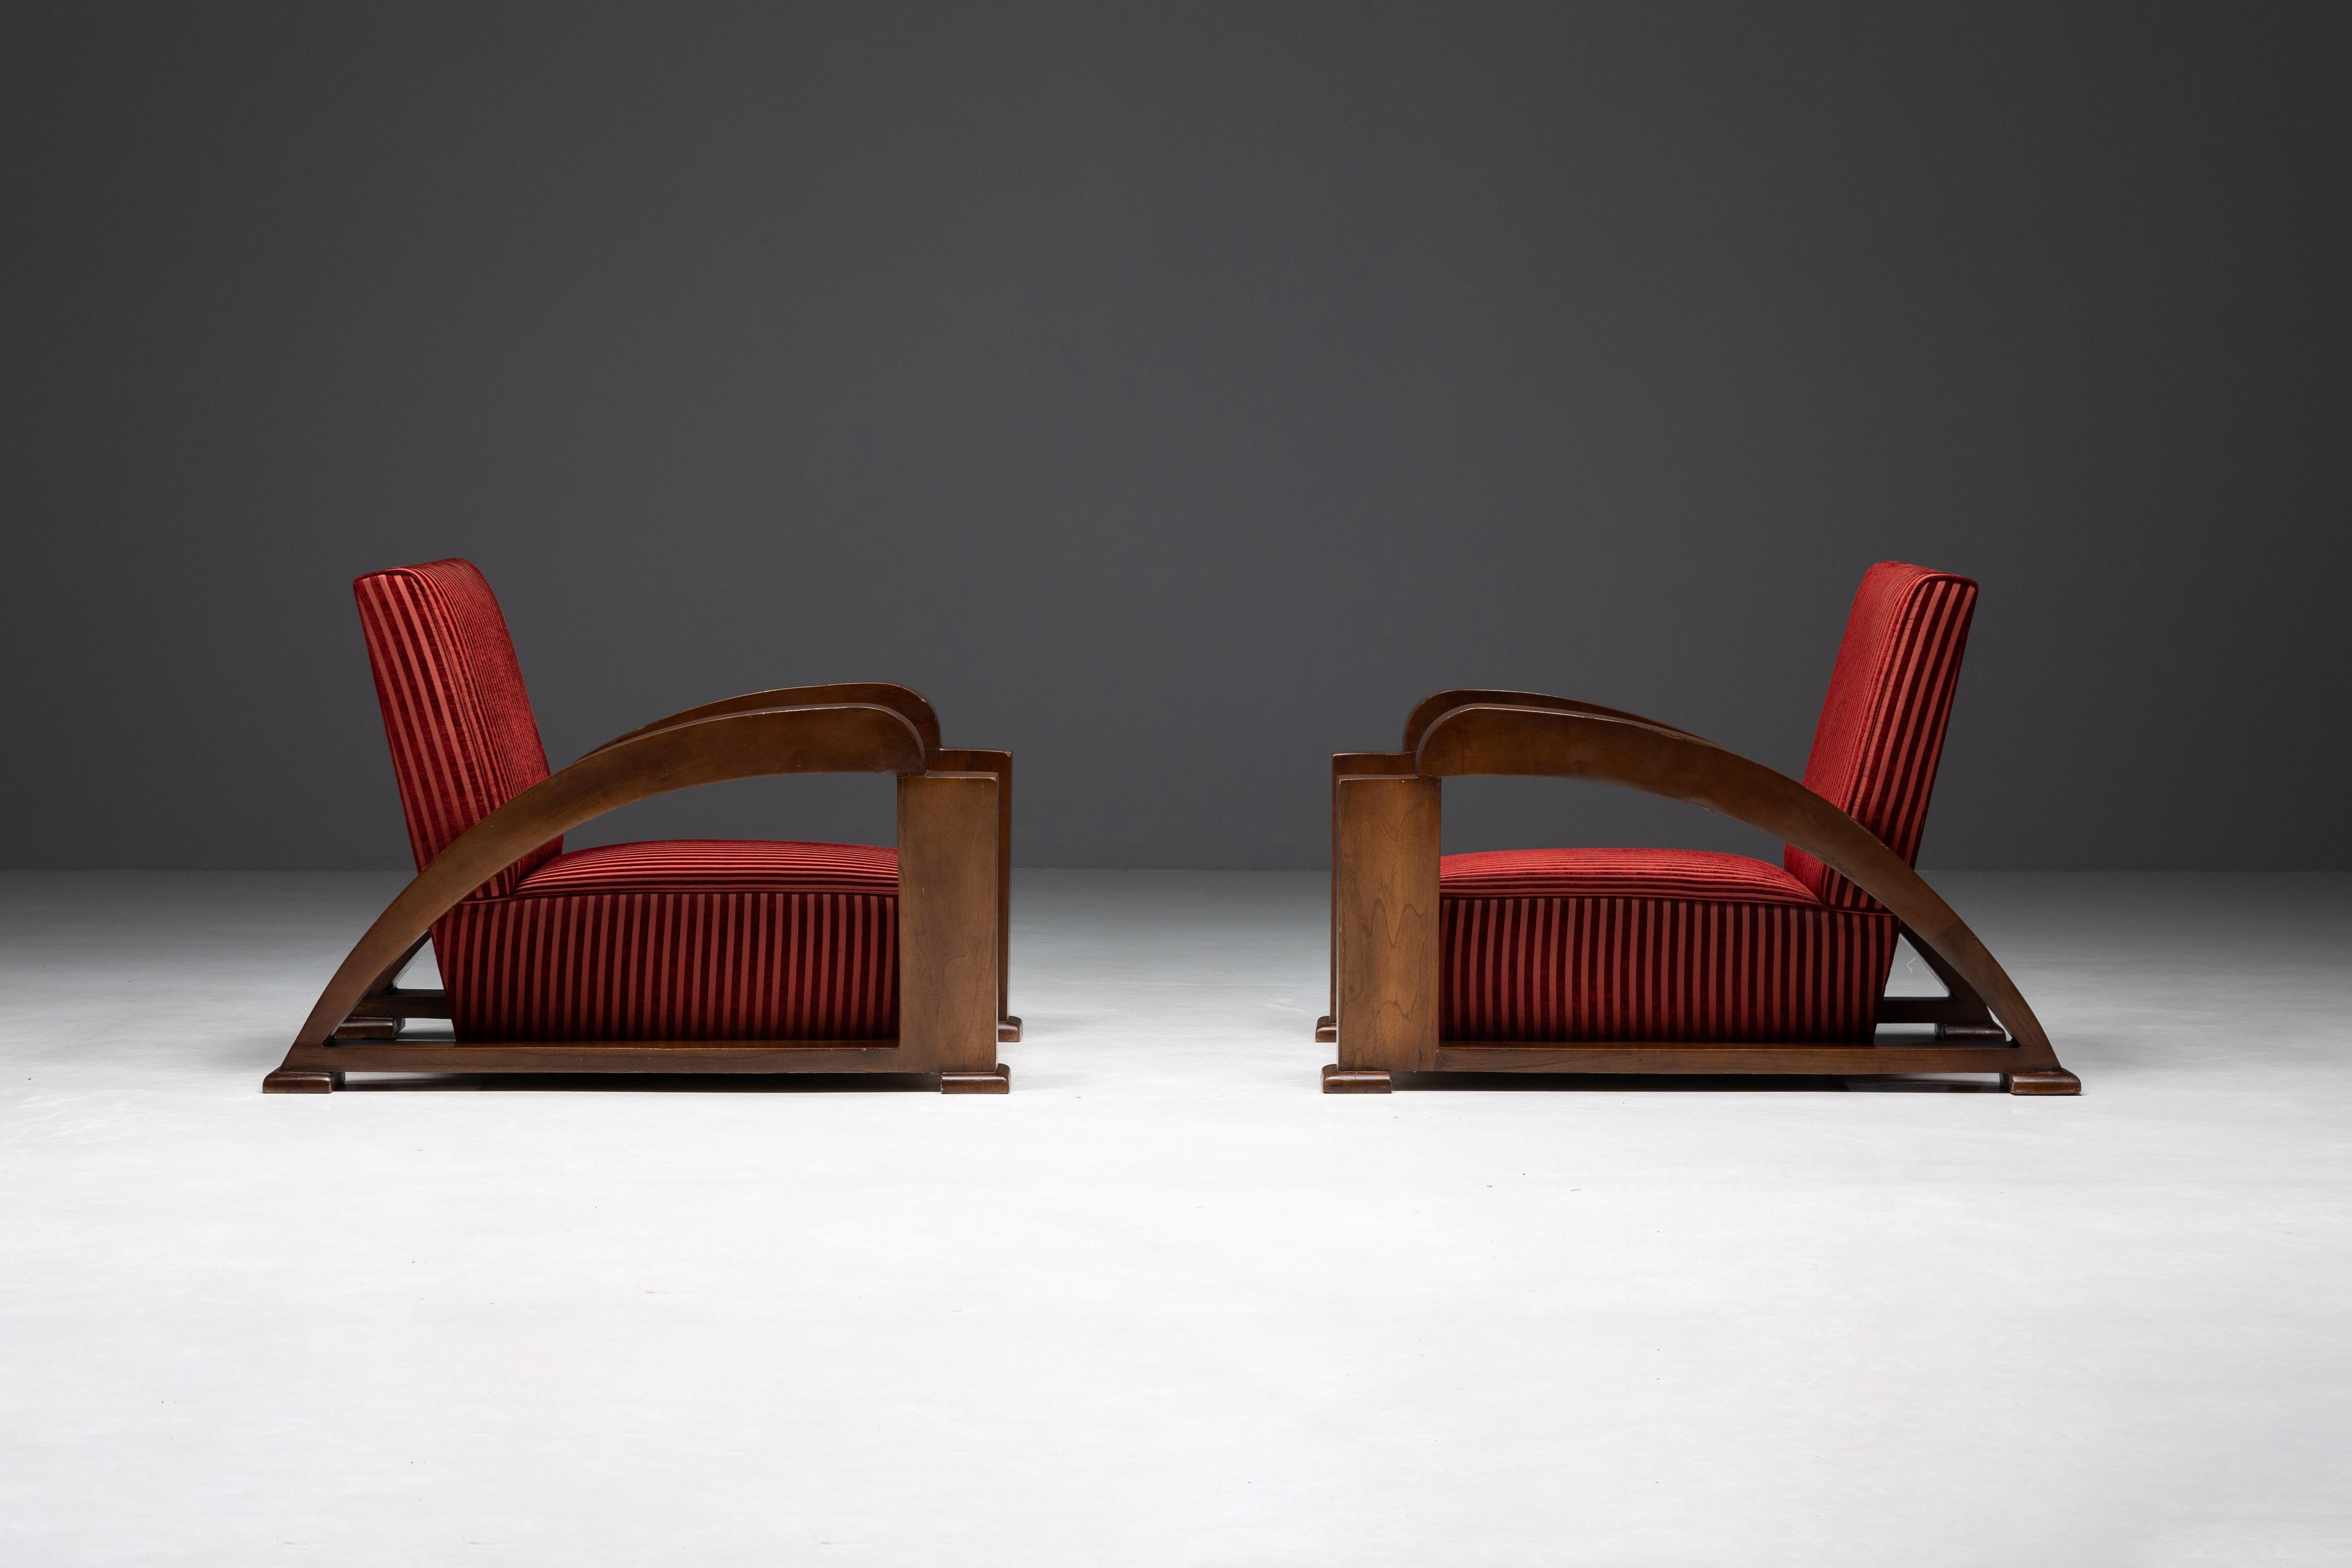 A pair of stunning Art Deco armchairs that encapsulate the sophistication of the early 20th century. These lounge chairs boast gracefully curved armrests, adding an air of elegance to their substantial presence. The fruitwood veneered frames exude